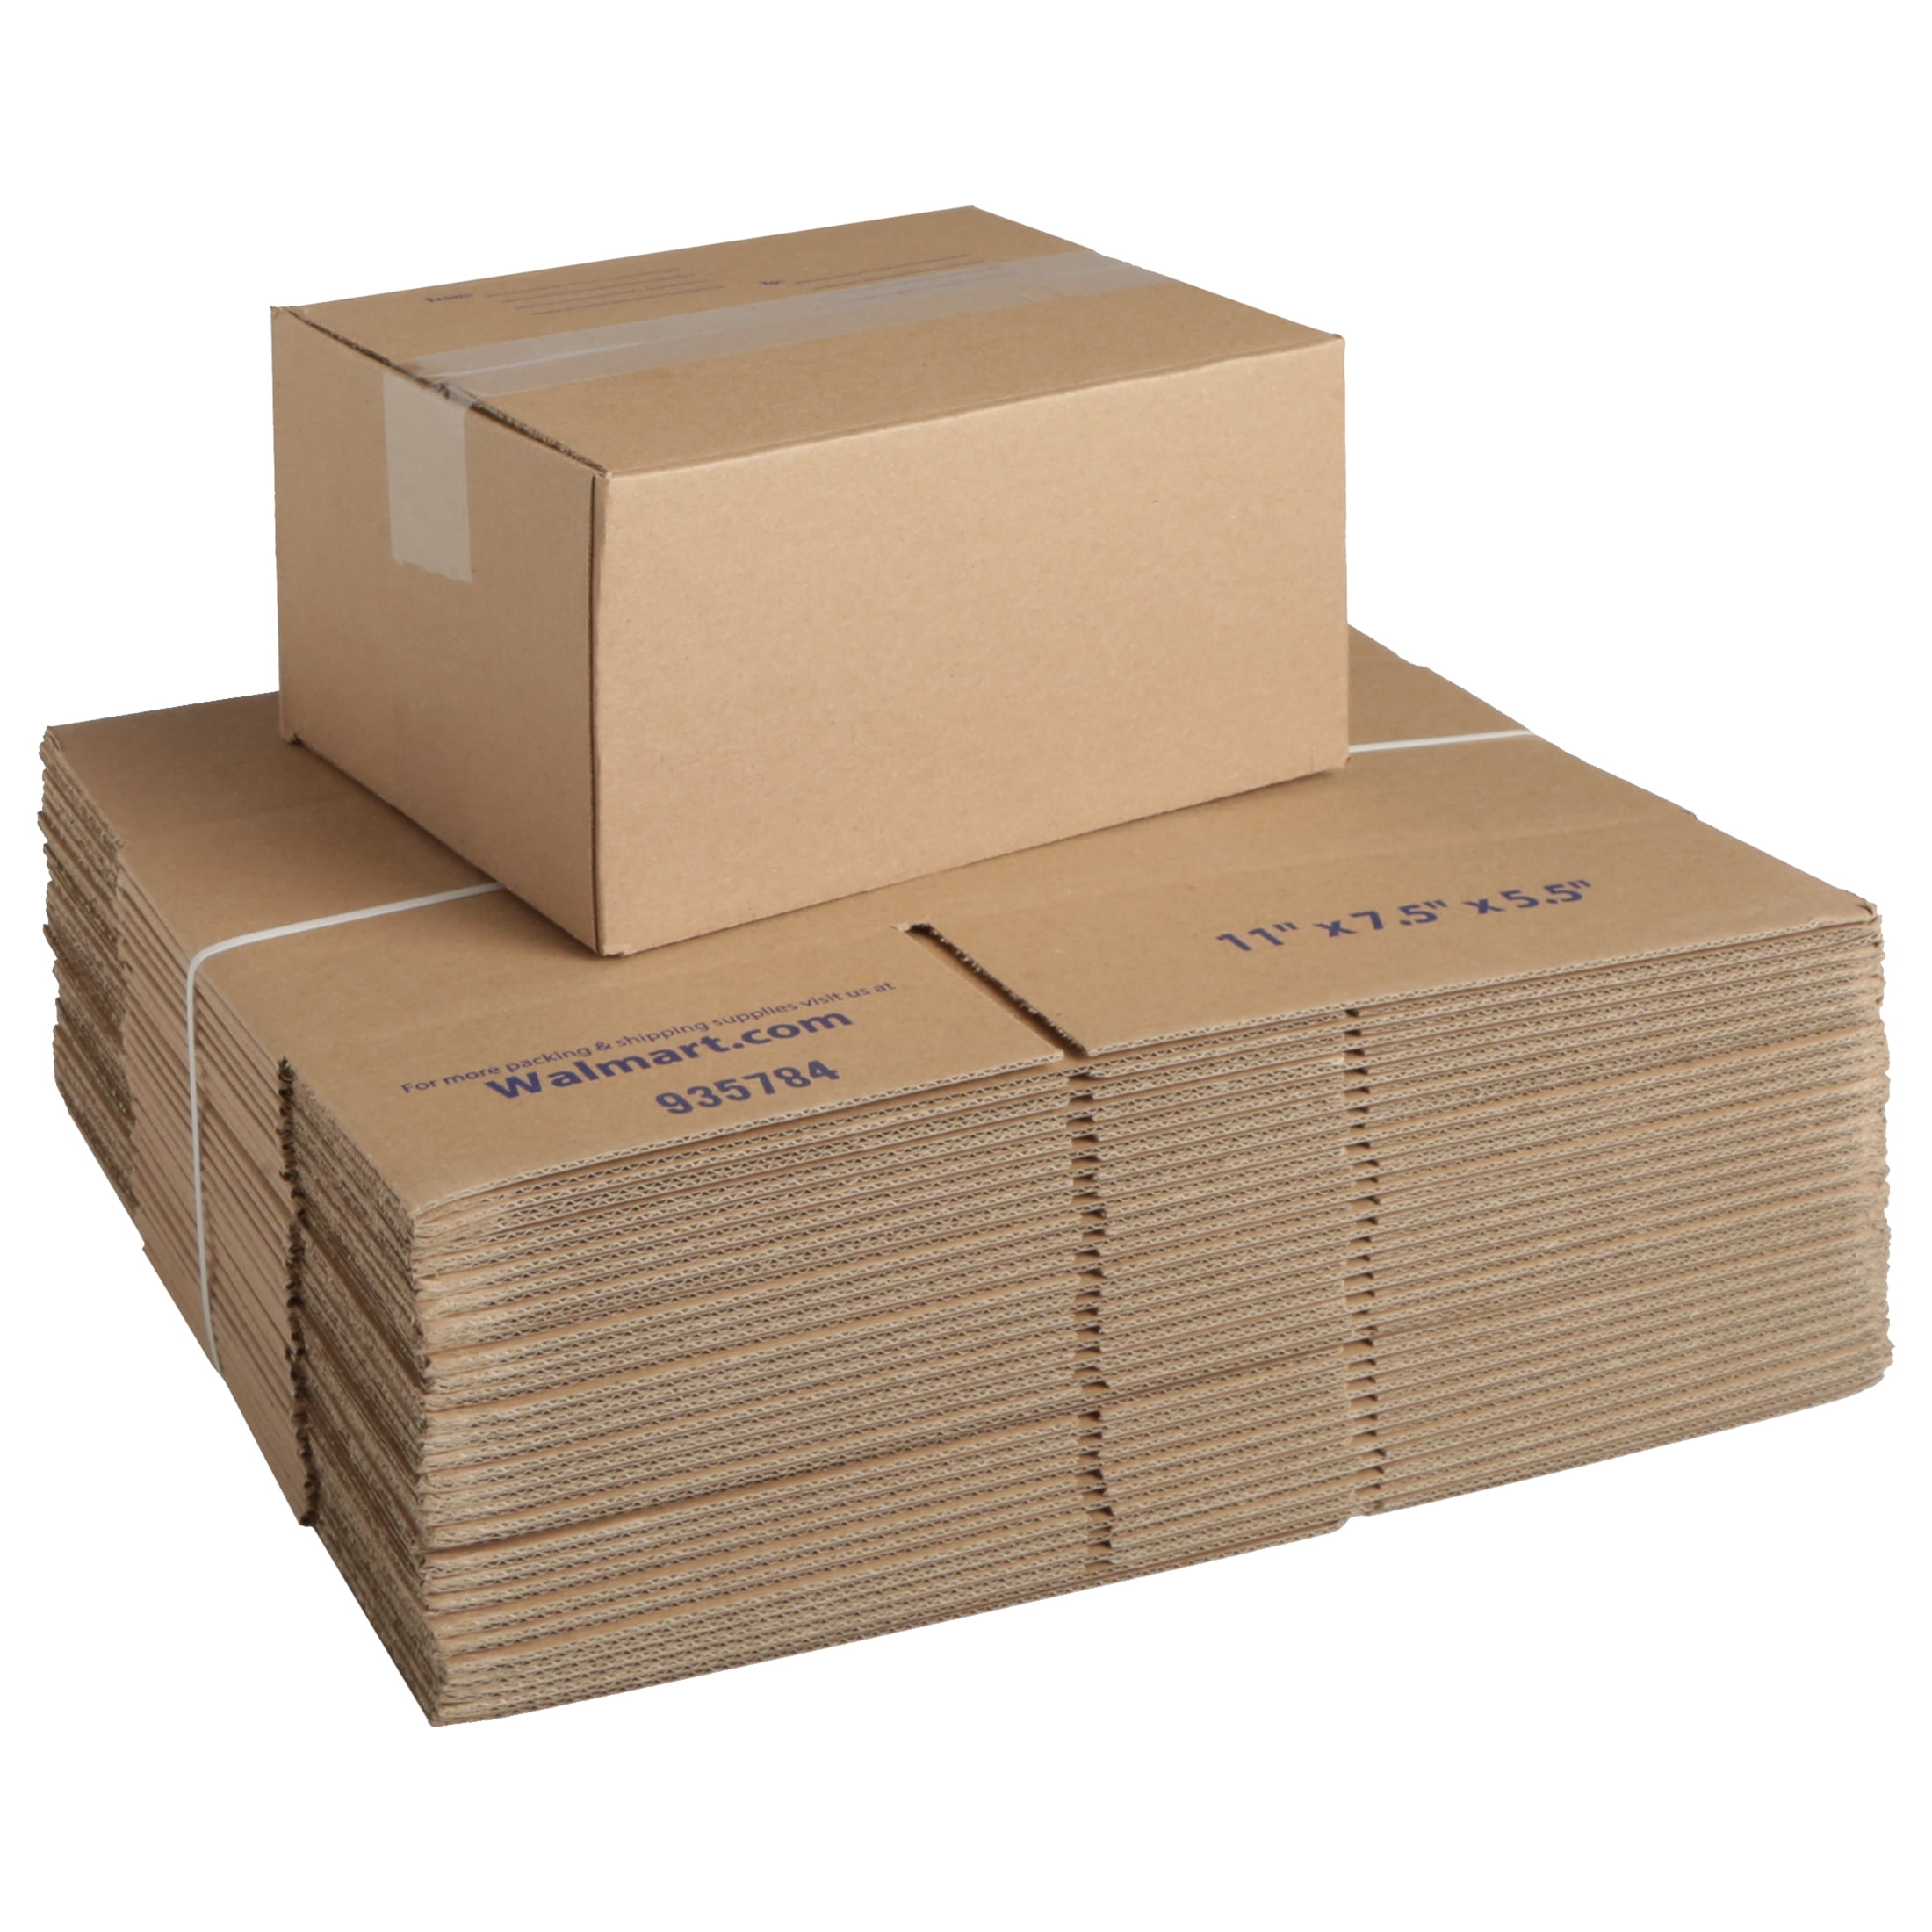 Lot of 25 Boxes 9 x 4 x 4" 1 piece boxes Oat Bark Free shipping 